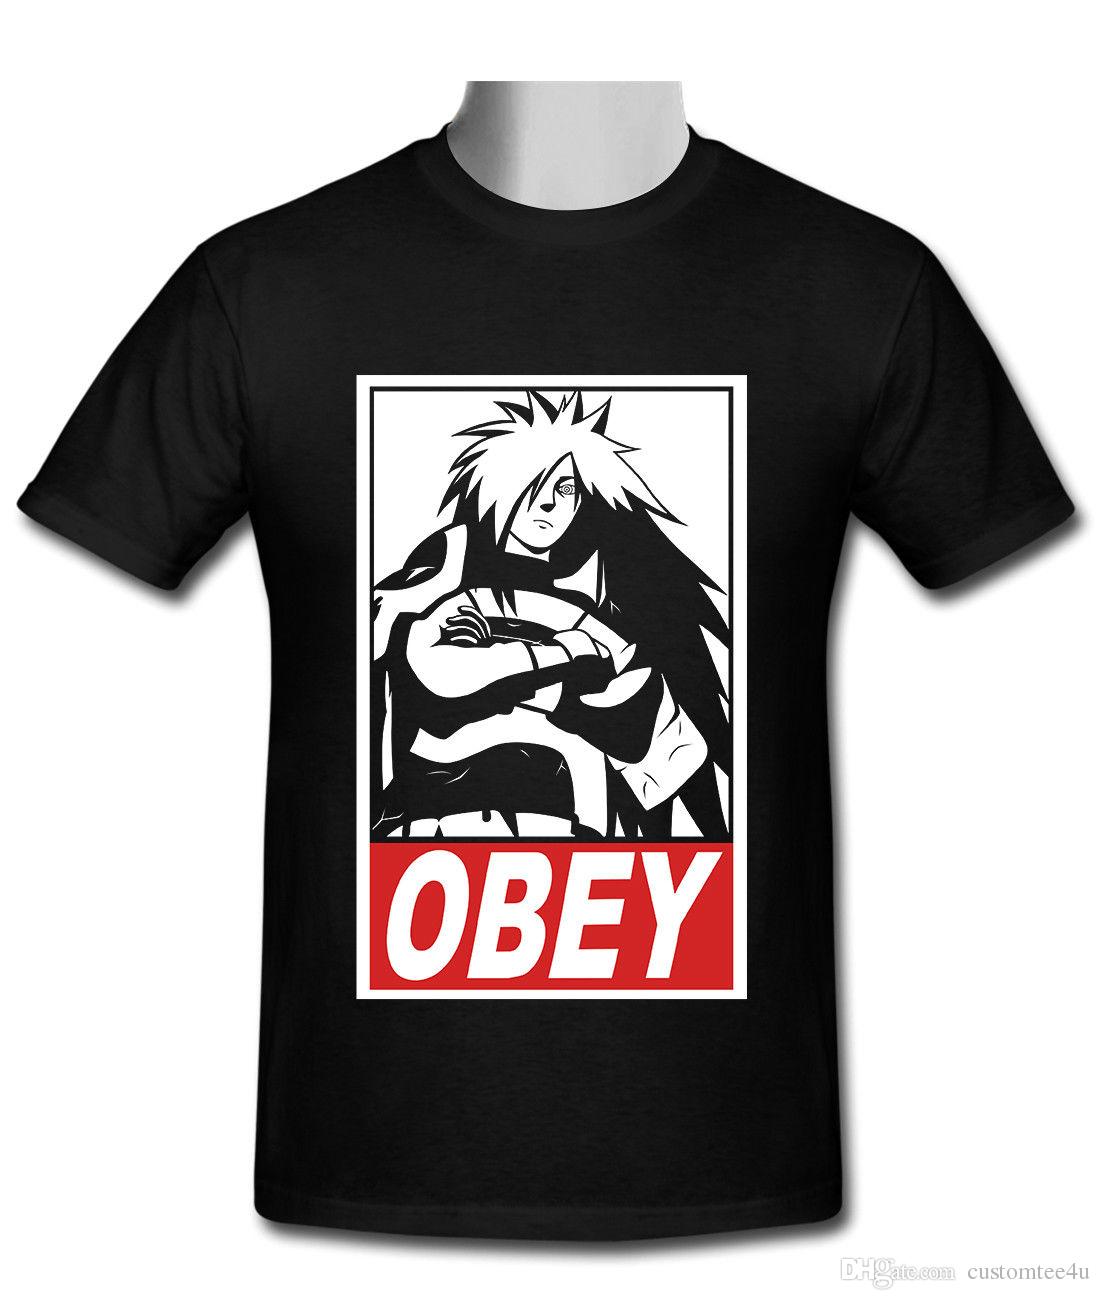 Team Obey Logo - OBEY Madara Uchiha Support Dropship Black T Shirt Size S To 2XL T ...